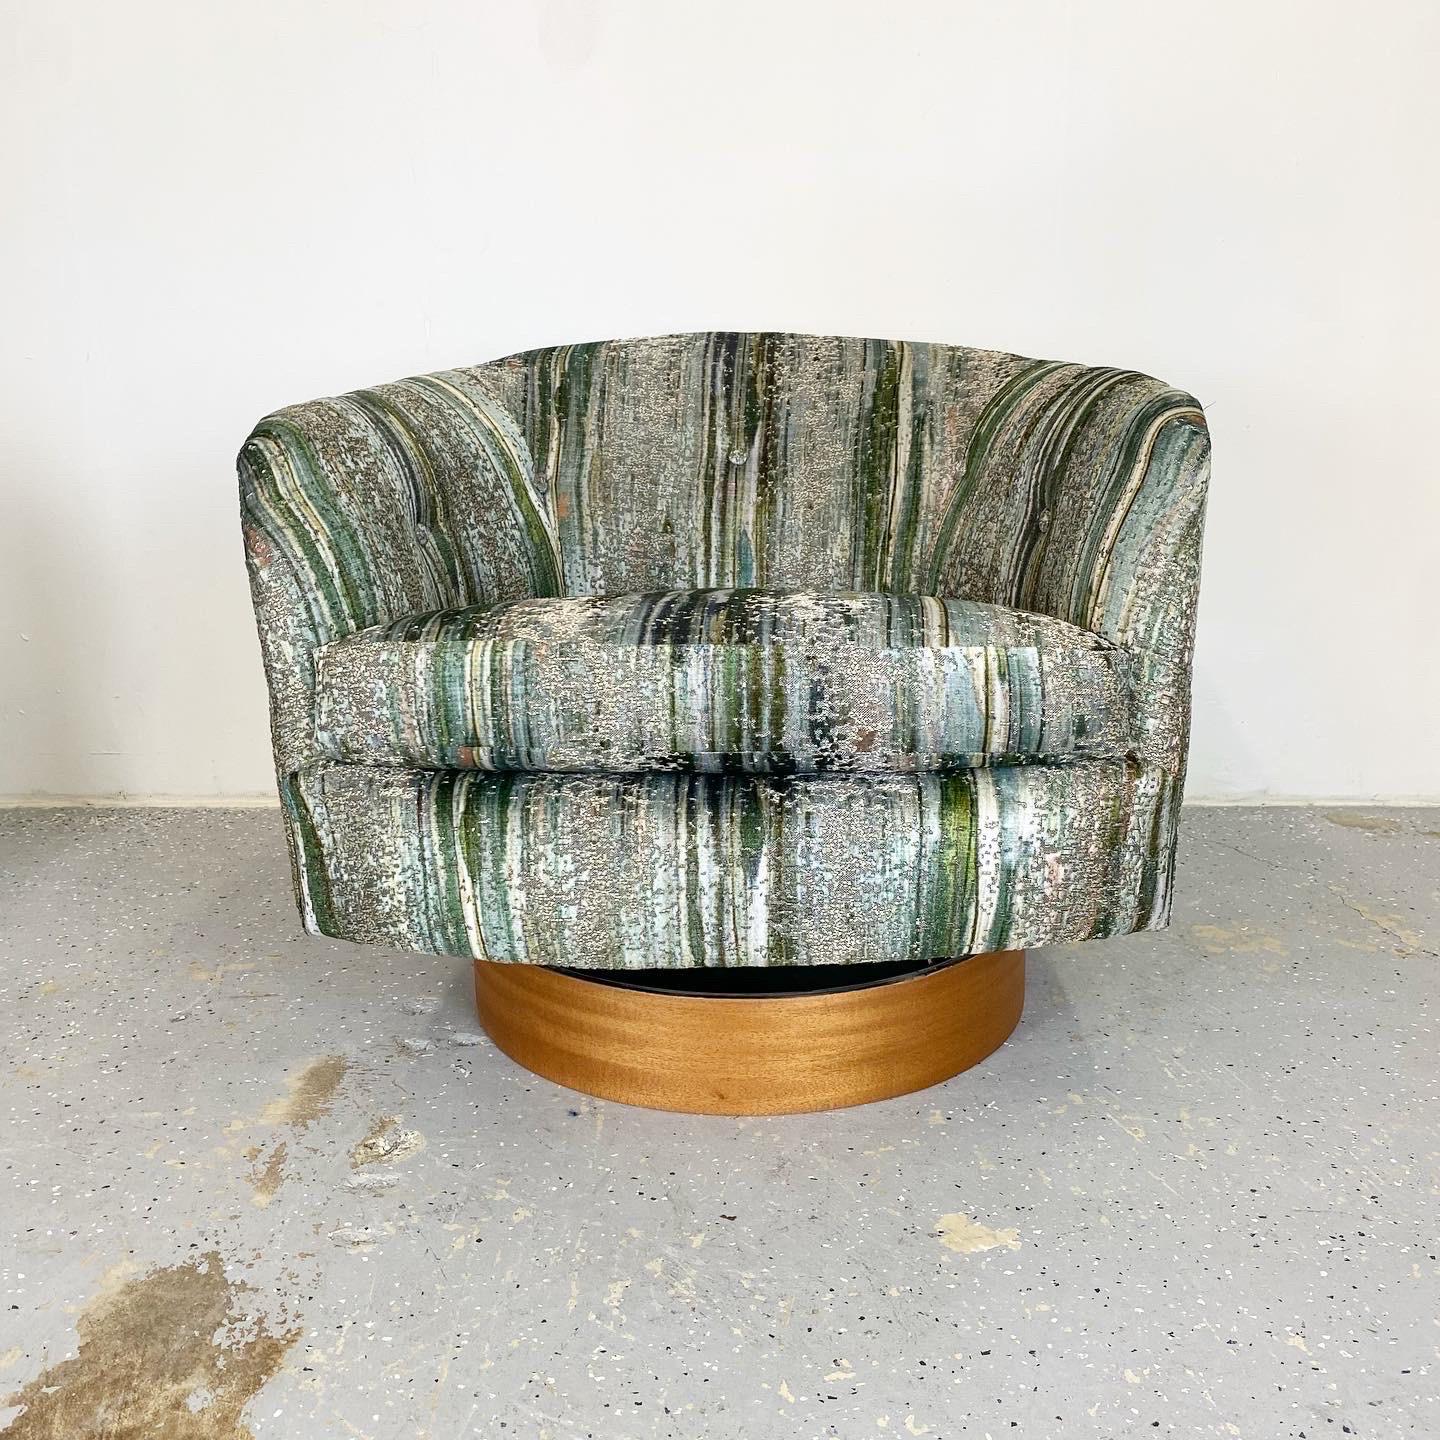 Vintage swivel/rockers by Thayer Coggin designed by Milo Baughman. These lounge chairs offer comfort and versatility in a small footprint. Newly upholstered S. Harris Brushstroke velvet with newly restored mahogany bases.